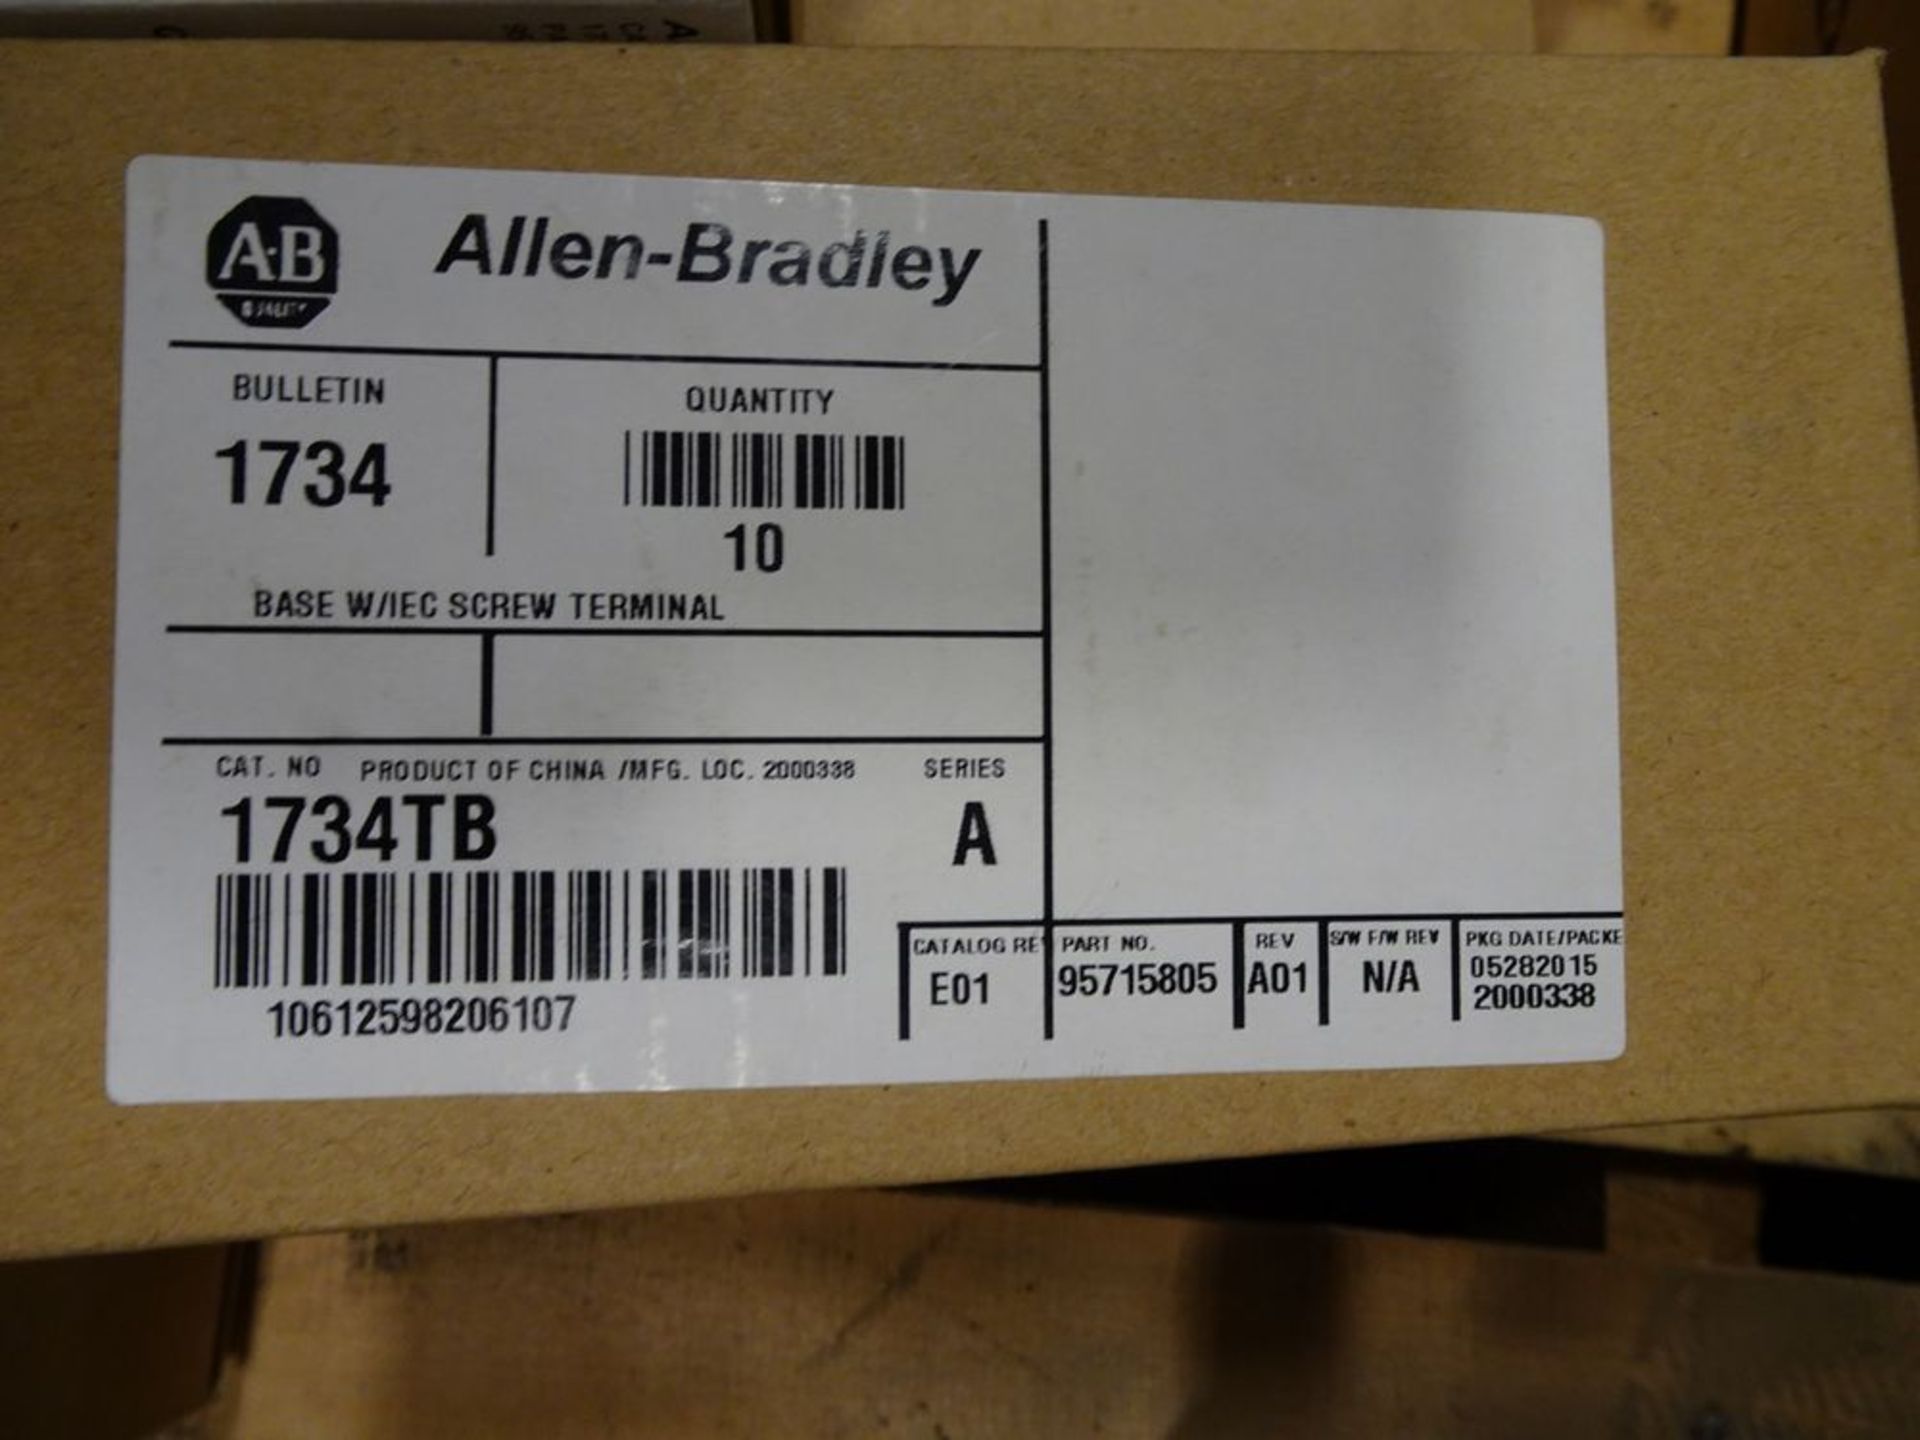 PALLET OF ASSORTED KEYENCE PRODUCT, ALLEN-BRADLEY SWITCHES, RELAYS, ETC. - Image 3 of 4